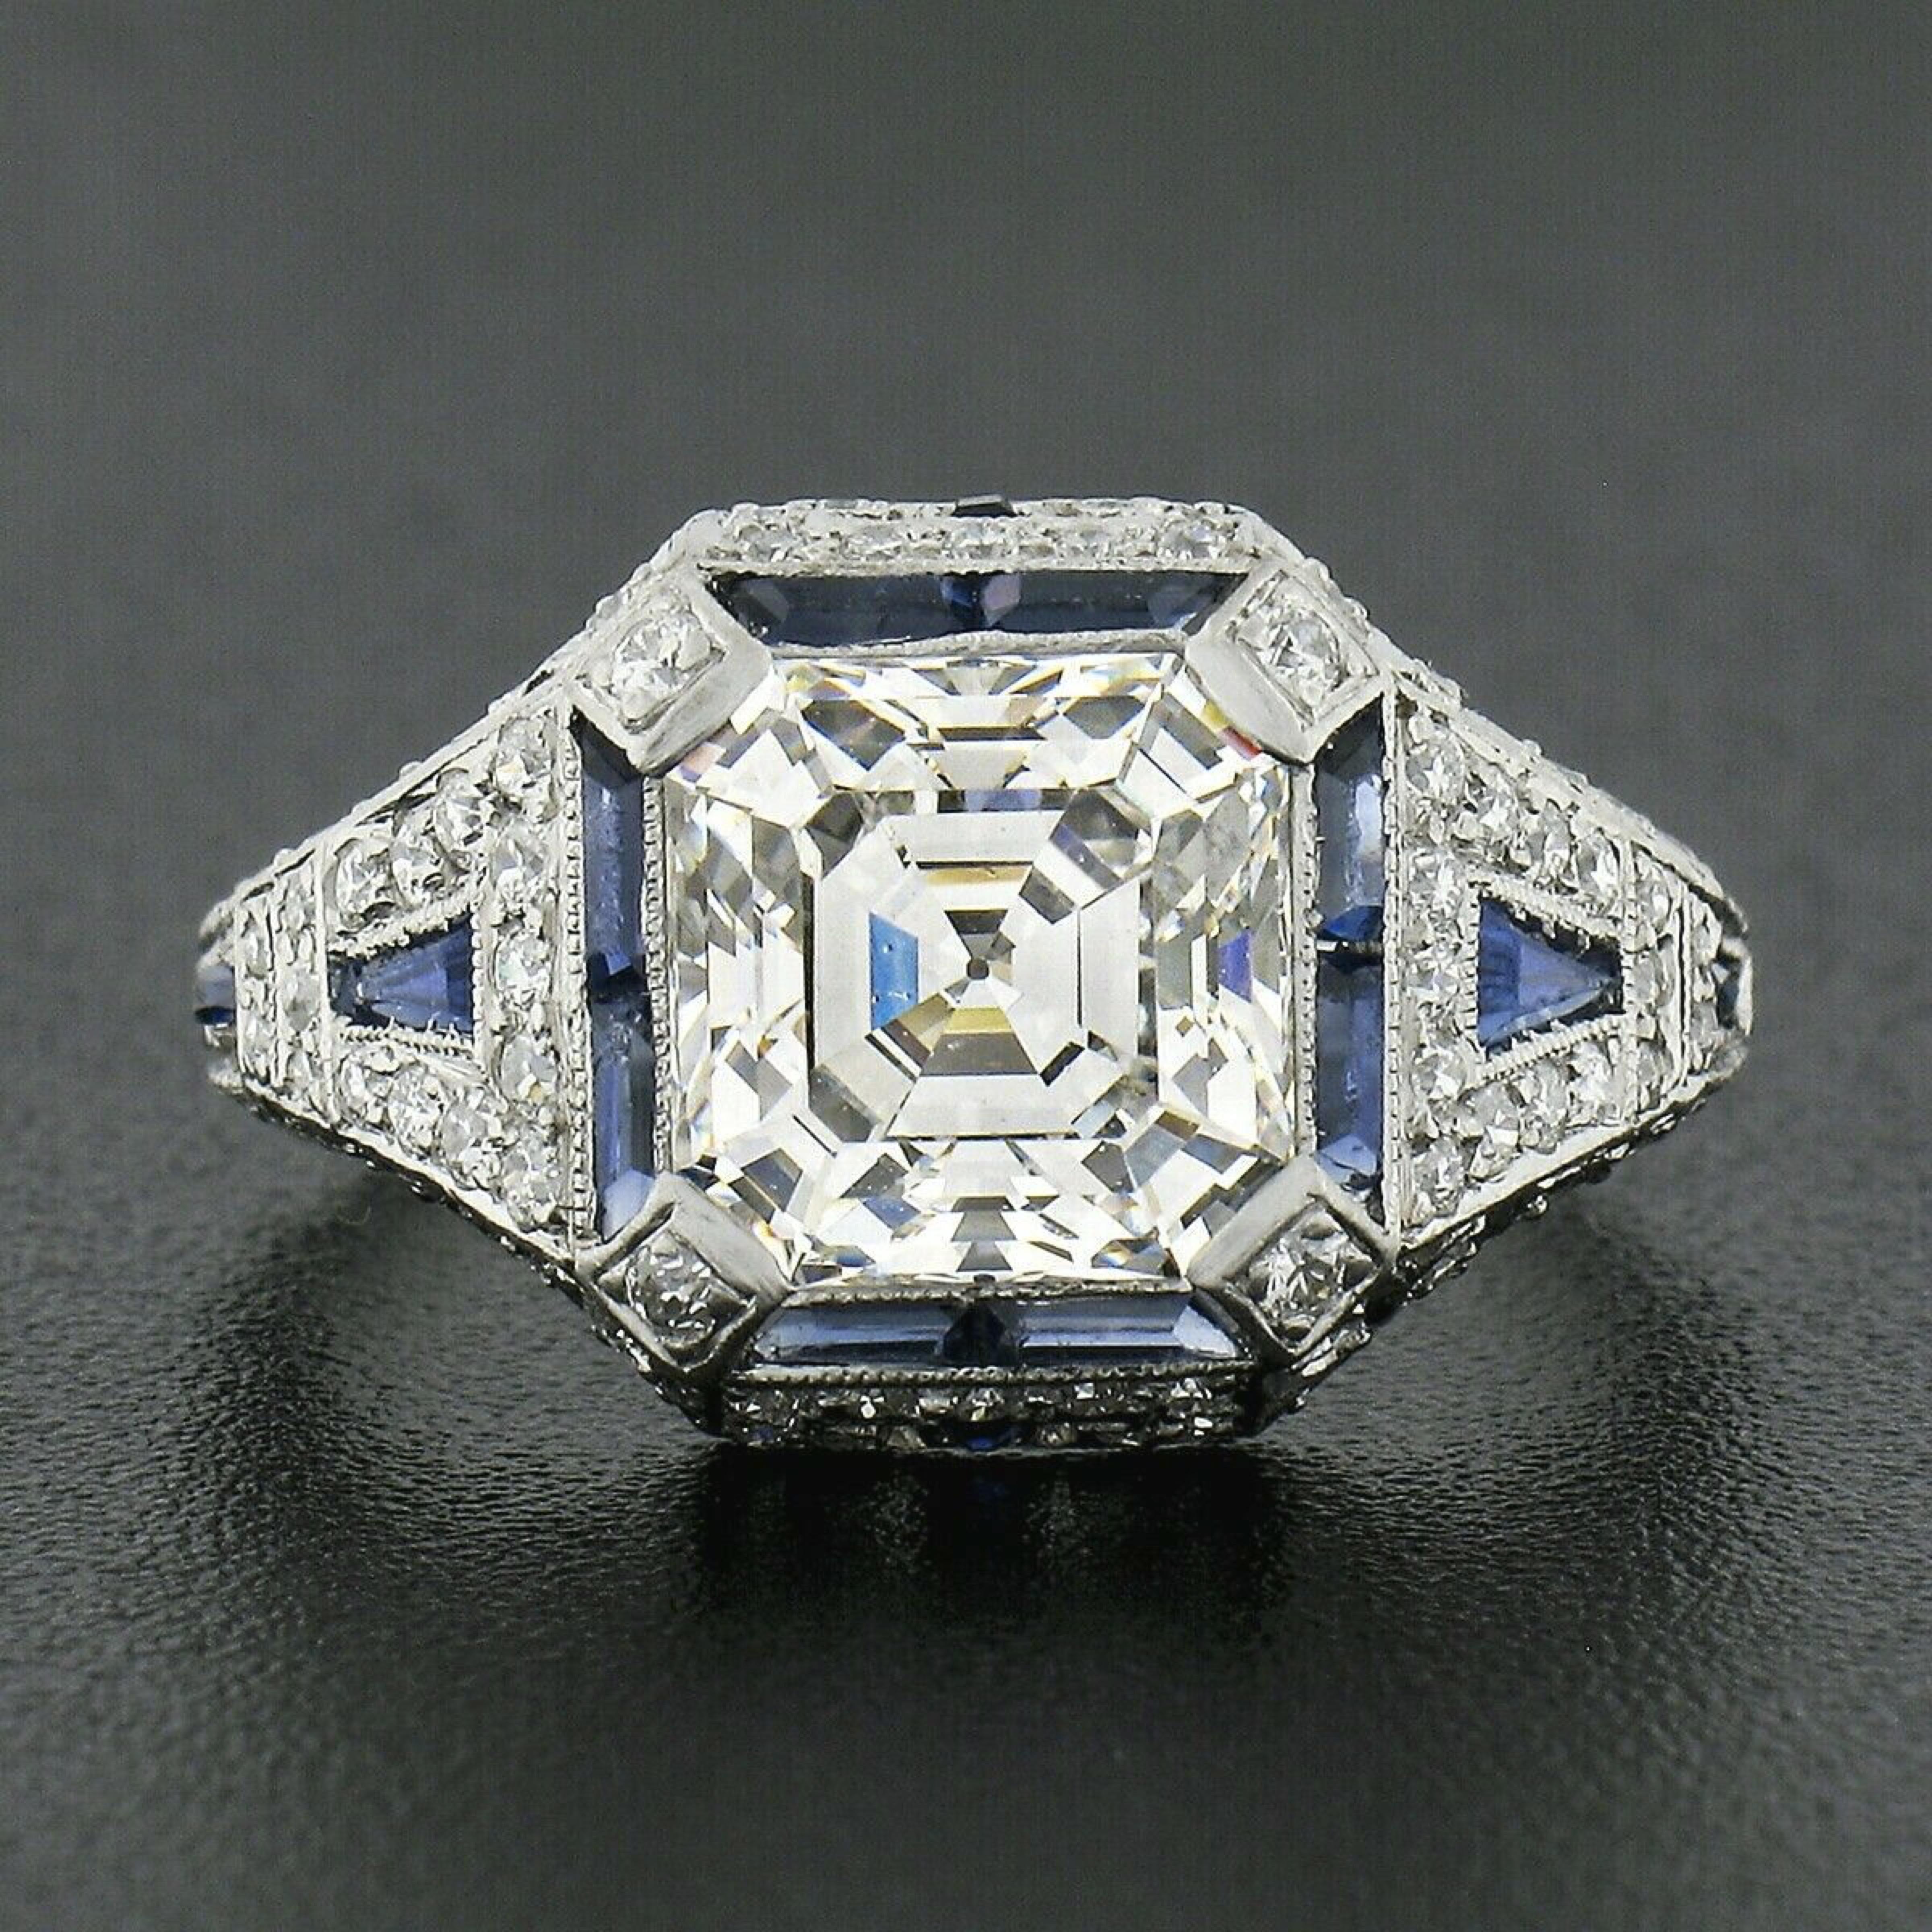 Here we have an absolutely breathtaking antique engagement ring that was crafted from solid platinum during the art deco period. This ring features a stunning, GIA certified, asscher cut (square emerald cut) diamond neatly prong set at the center of